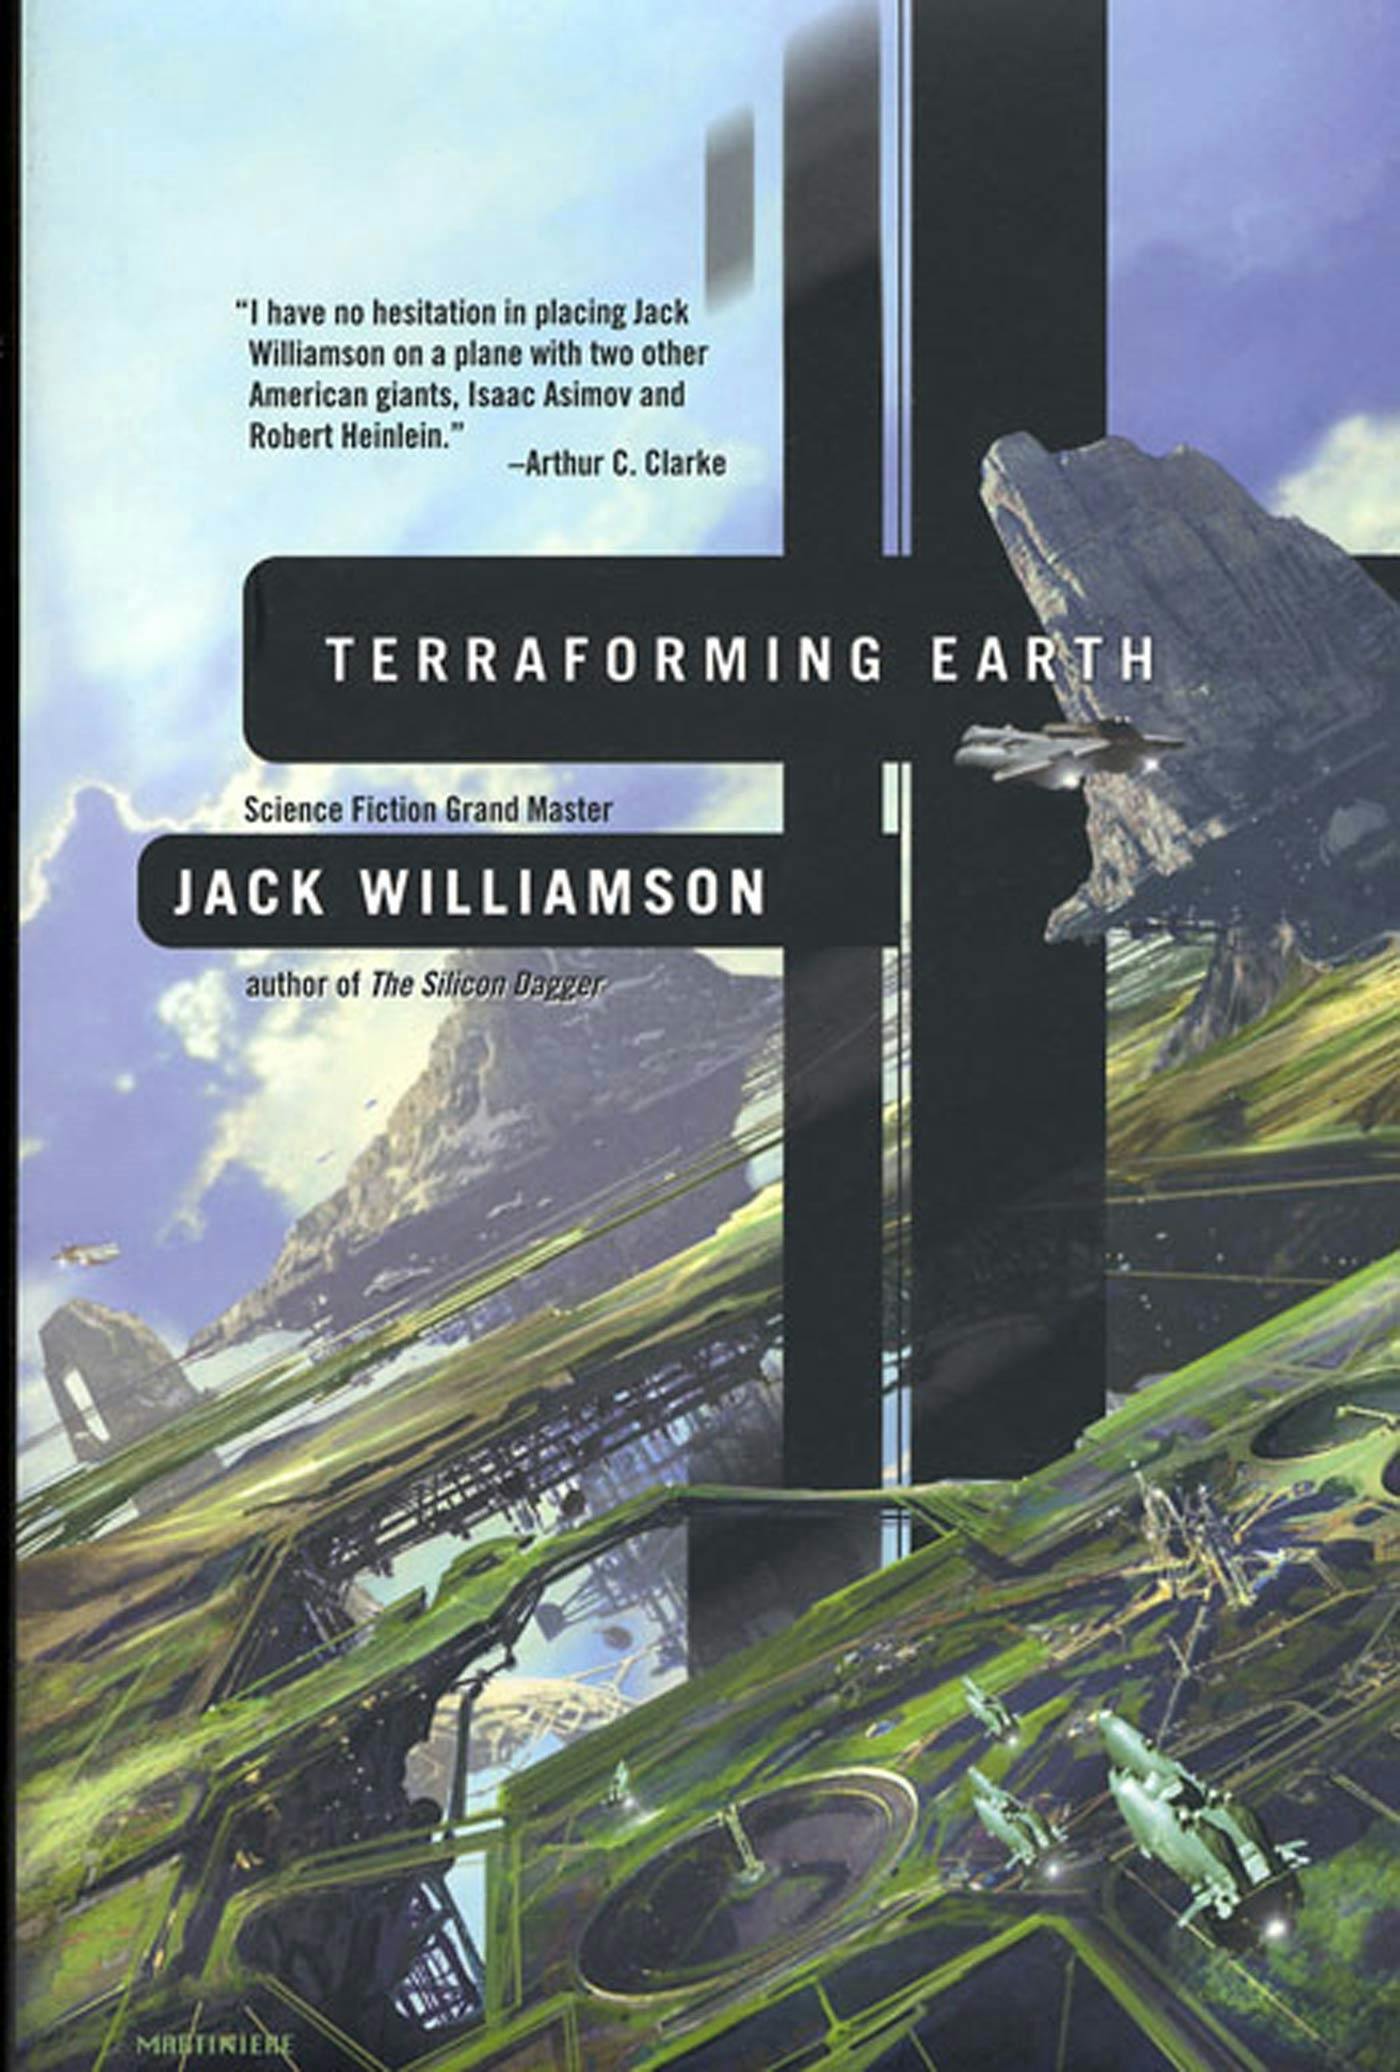 Cover for the book titled as: Terraforming Earth